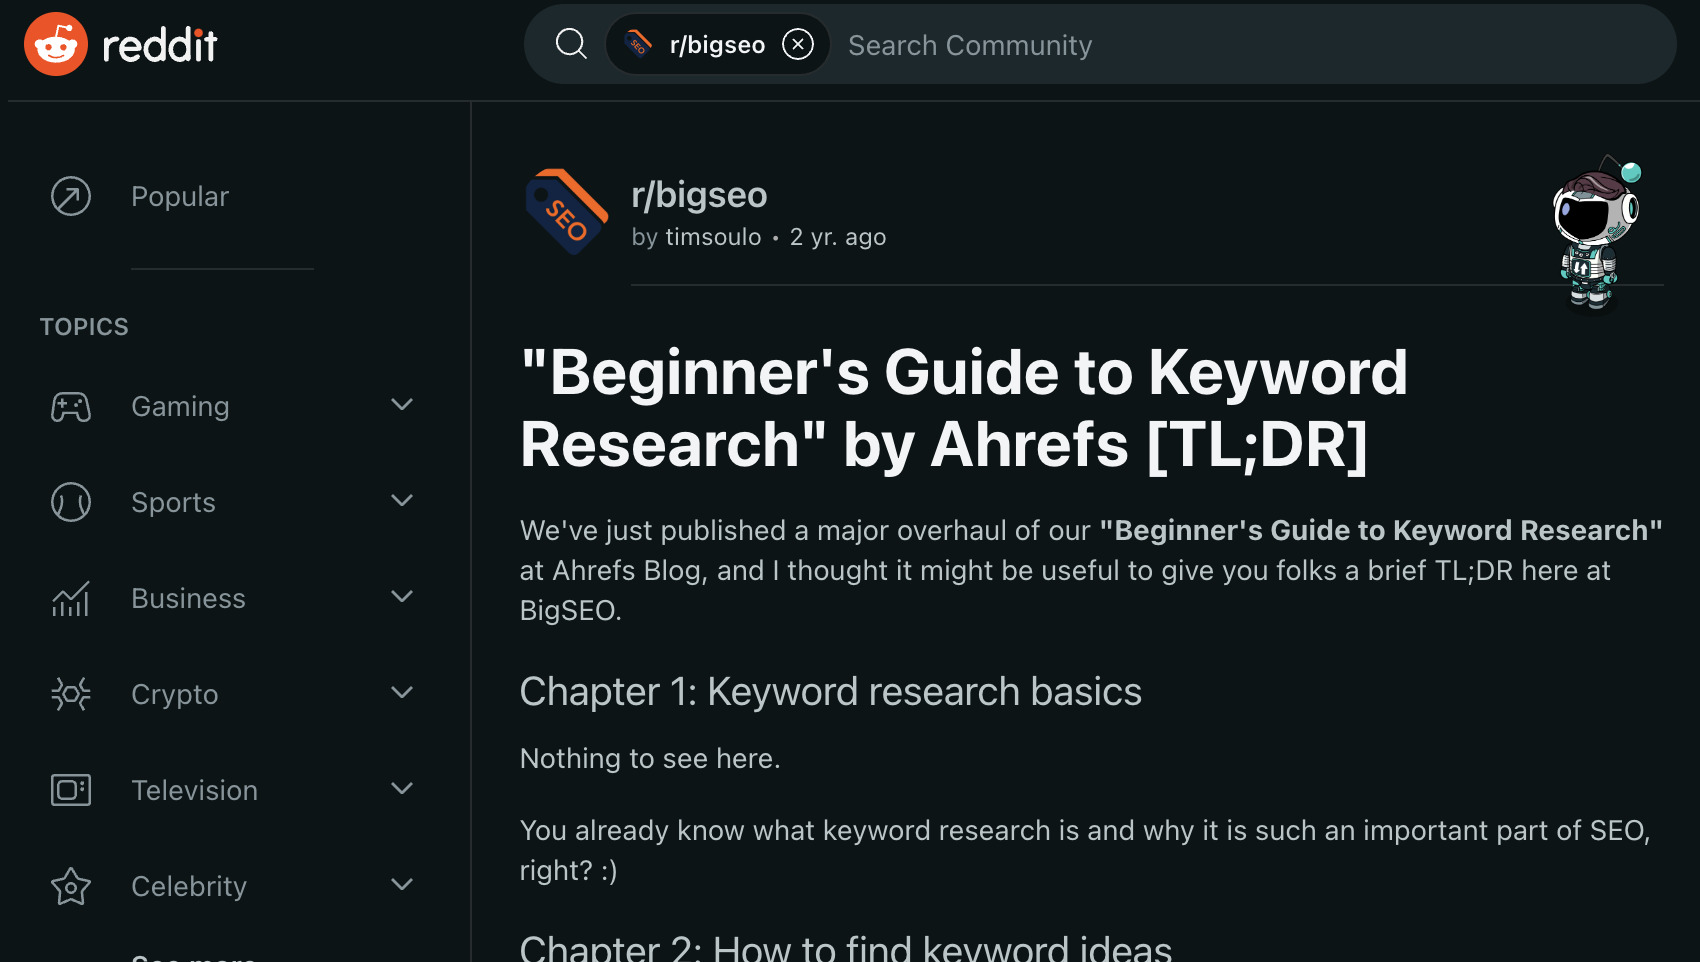 My colleague, Tim, posted a shortened version of his blog post on keyword research on Reddit, which is a great example of a "push" distribution strategy
